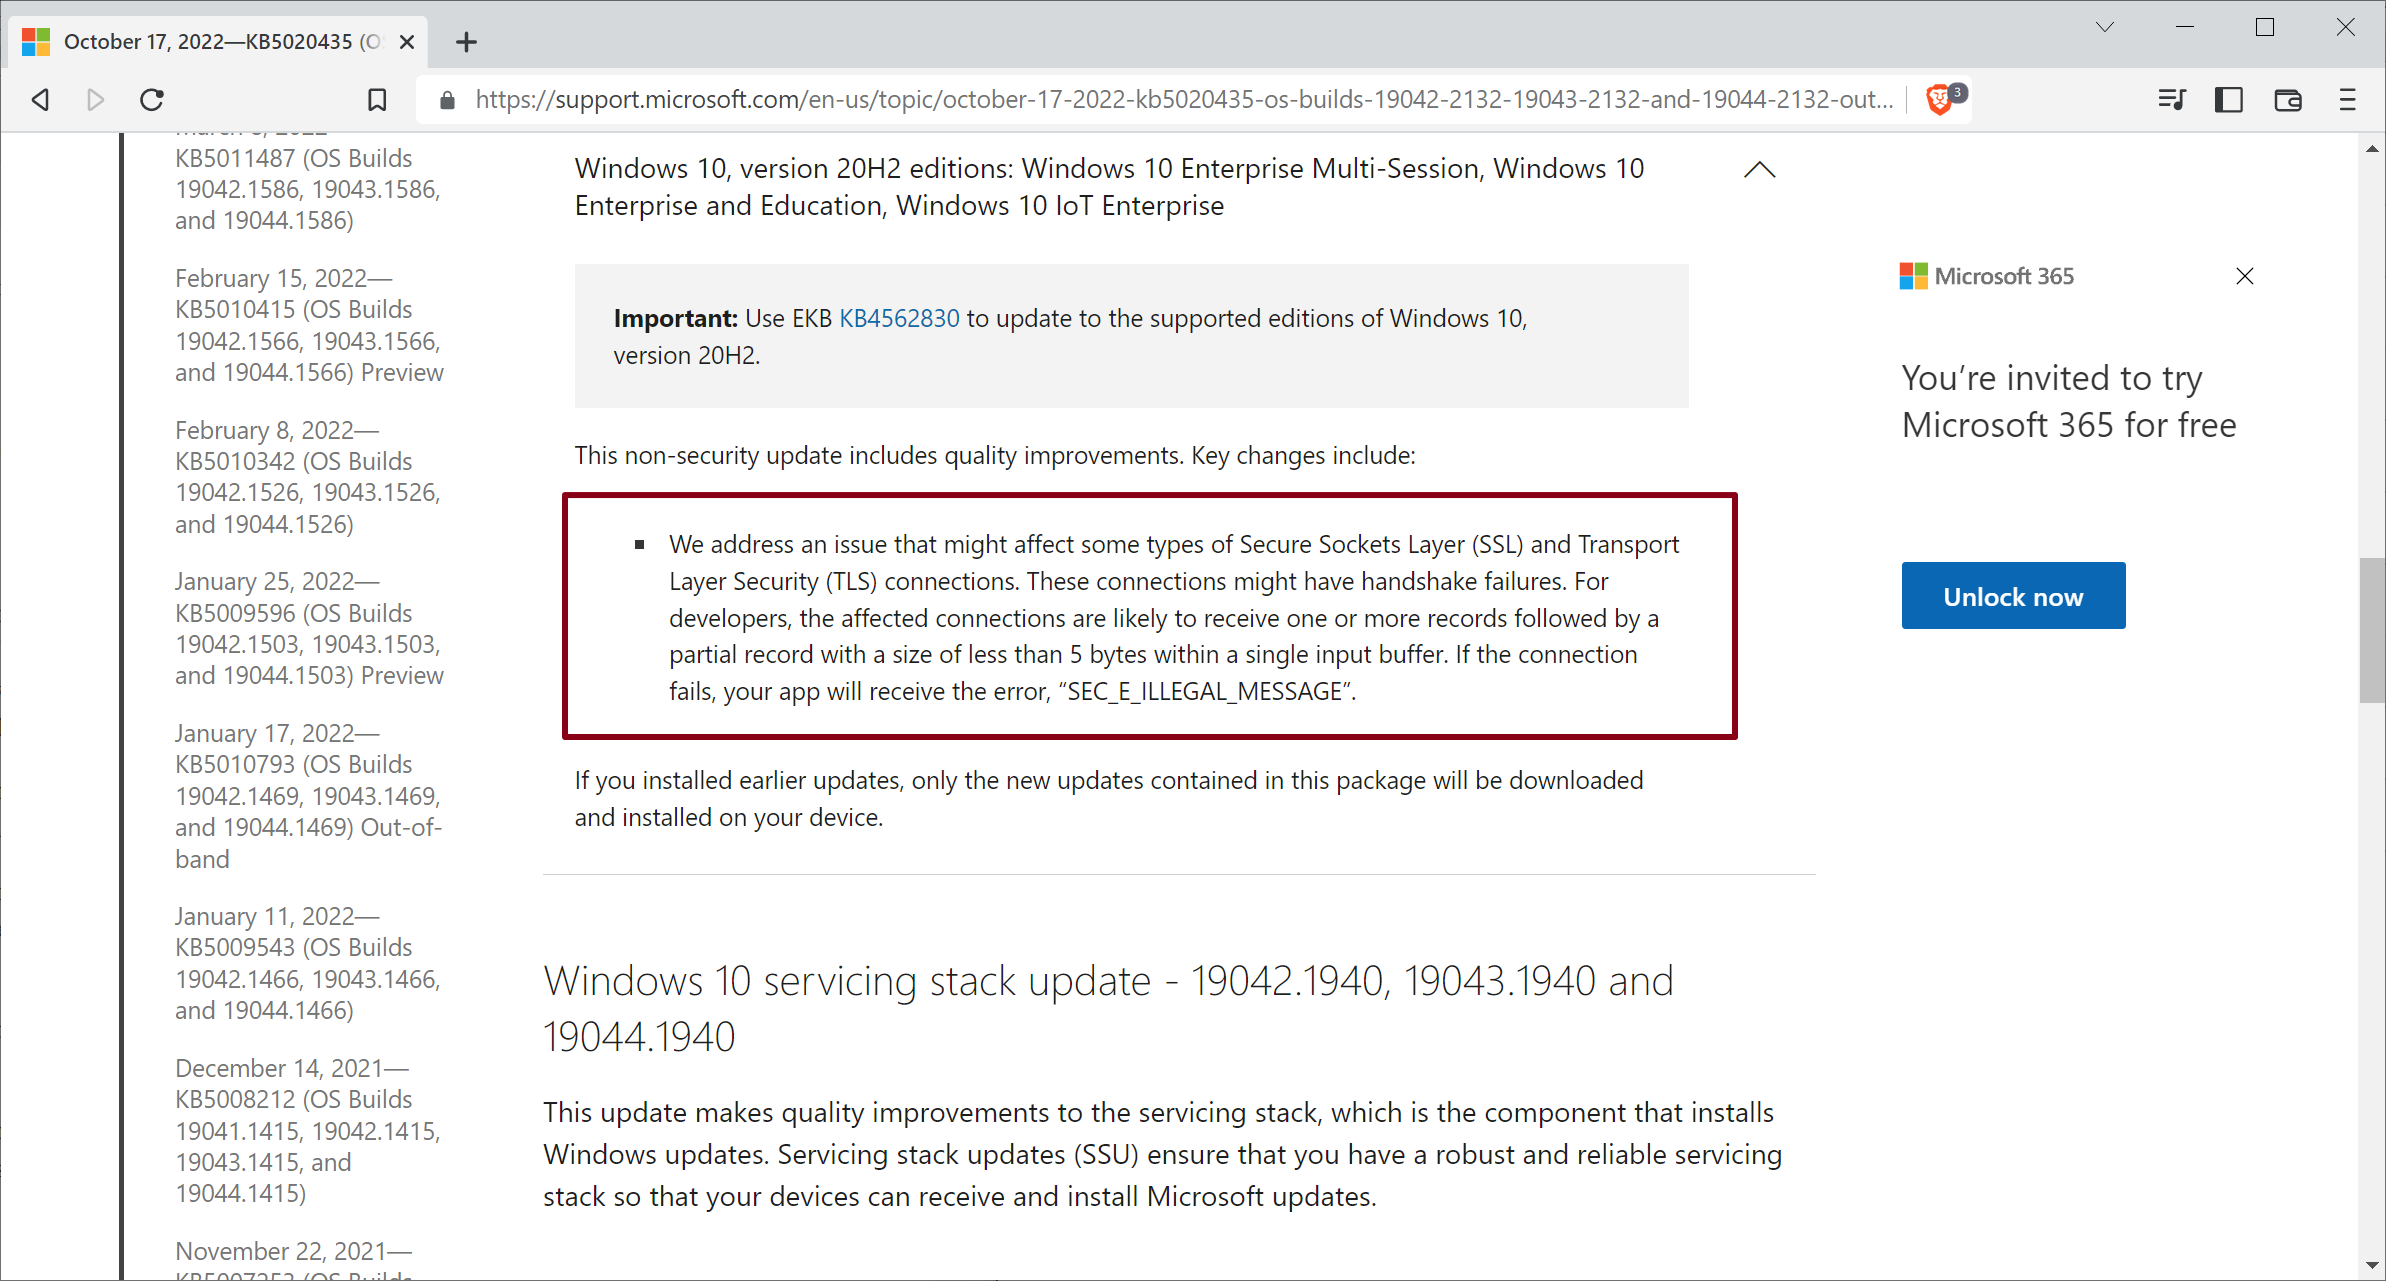 windows 10 out-of-band update KB5020435